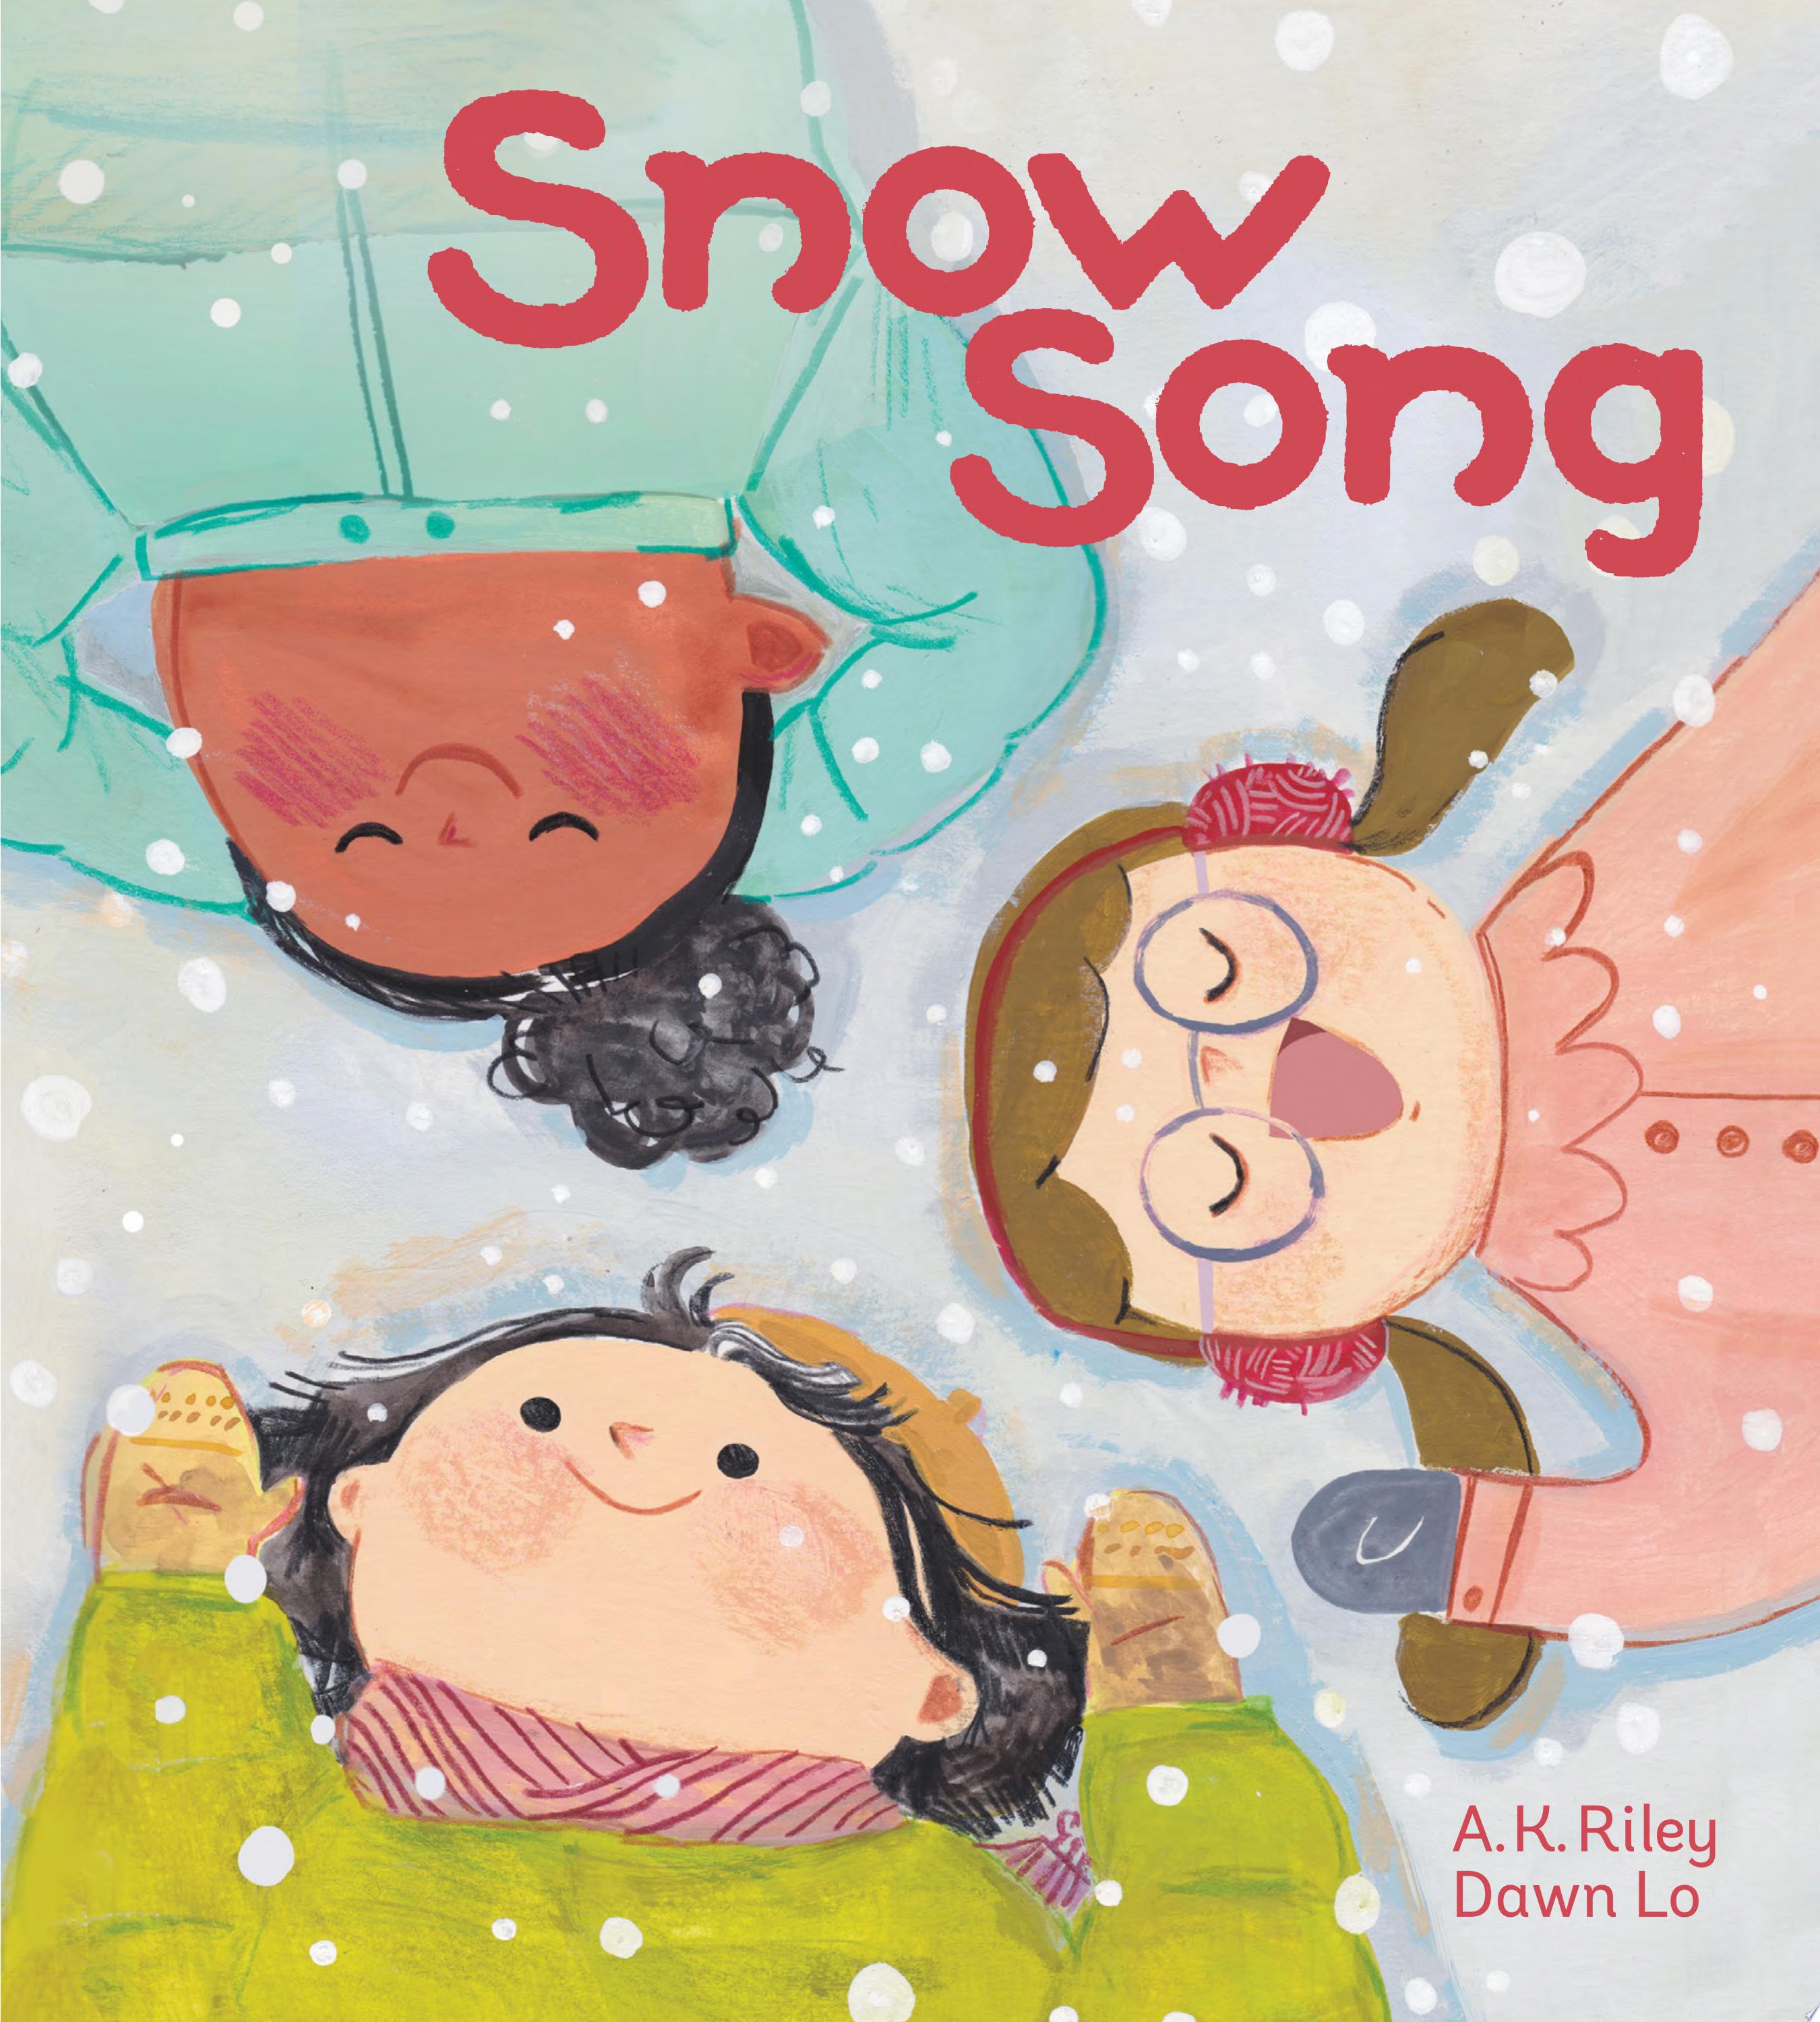 Image for "Snow Song"